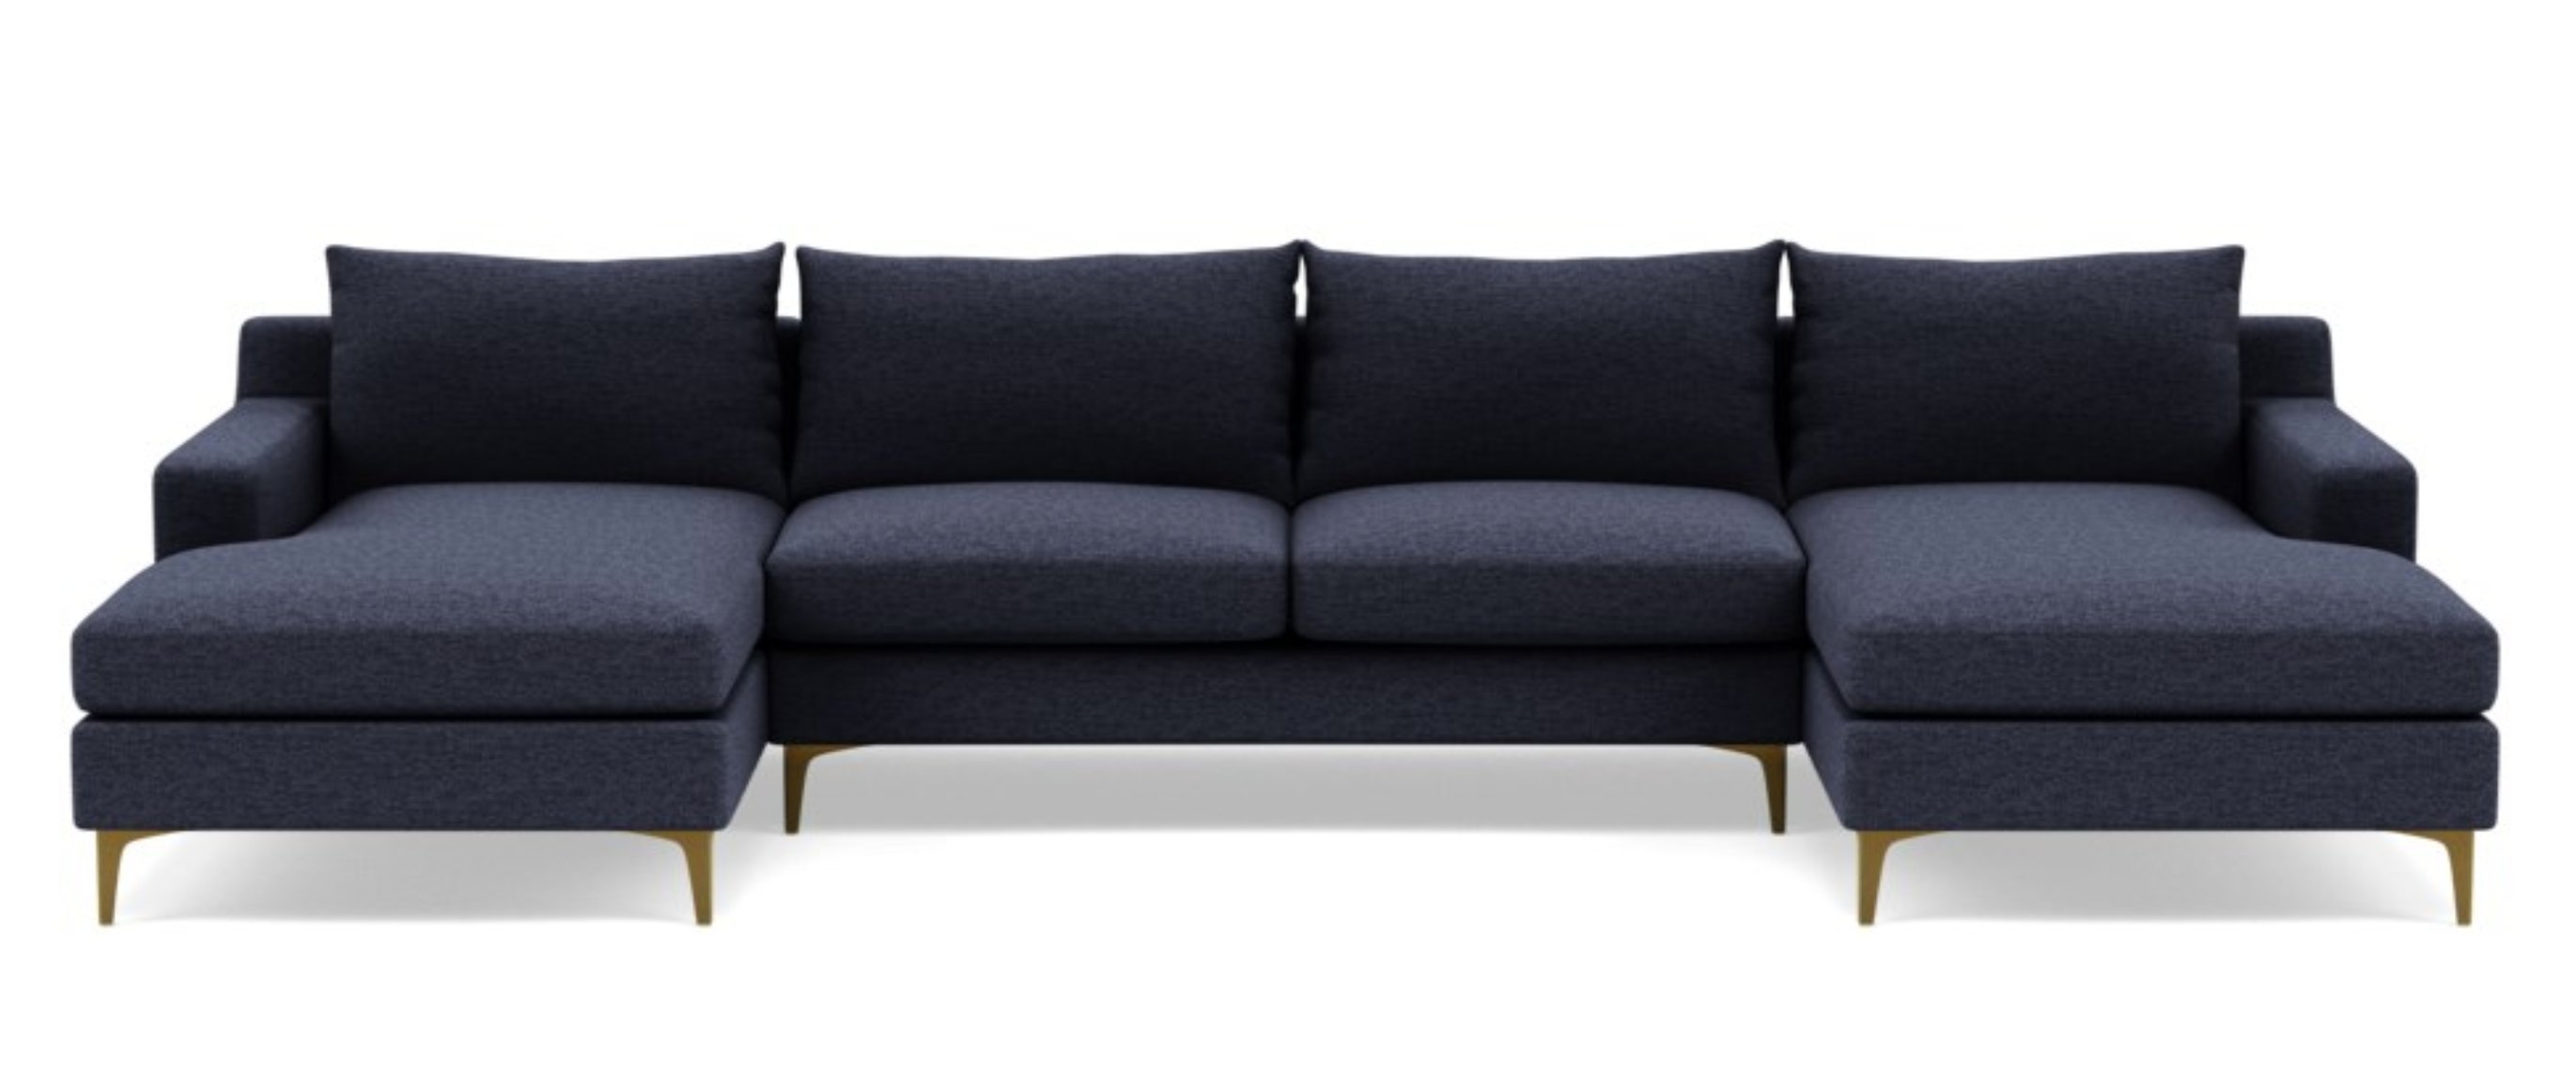 SLOAN U-Sectional Sofa in Azure Heathered Weave with Brass Plated Sloan L Leg - Interior Define